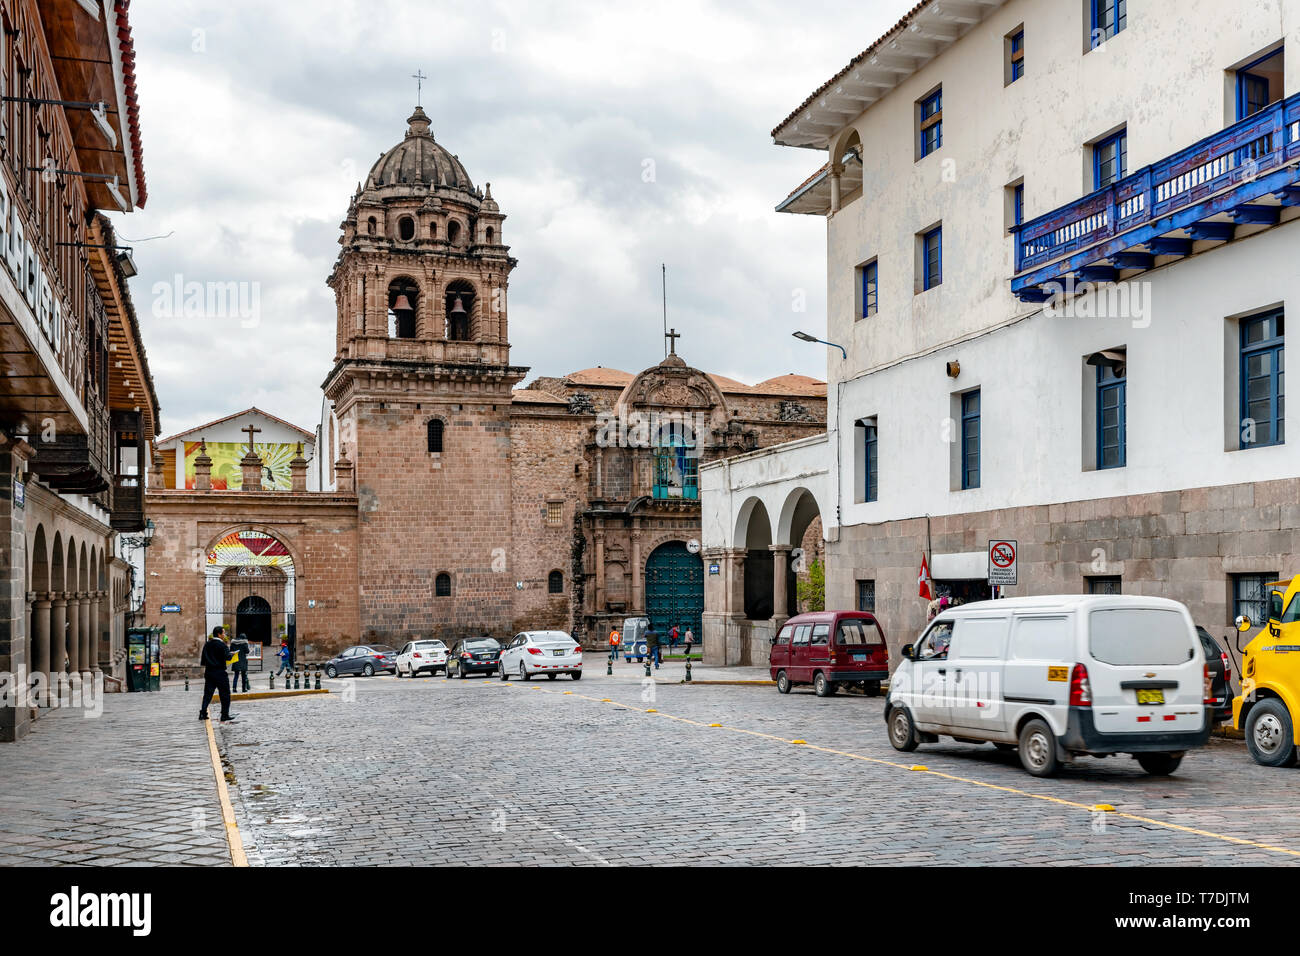 Cusco, Peru - April 3, 2019: Facade of the Tempel and Convent of Order of Our Lady of Mercy located in Plaza Espinar, in the historic center of the Cu Stock Photo